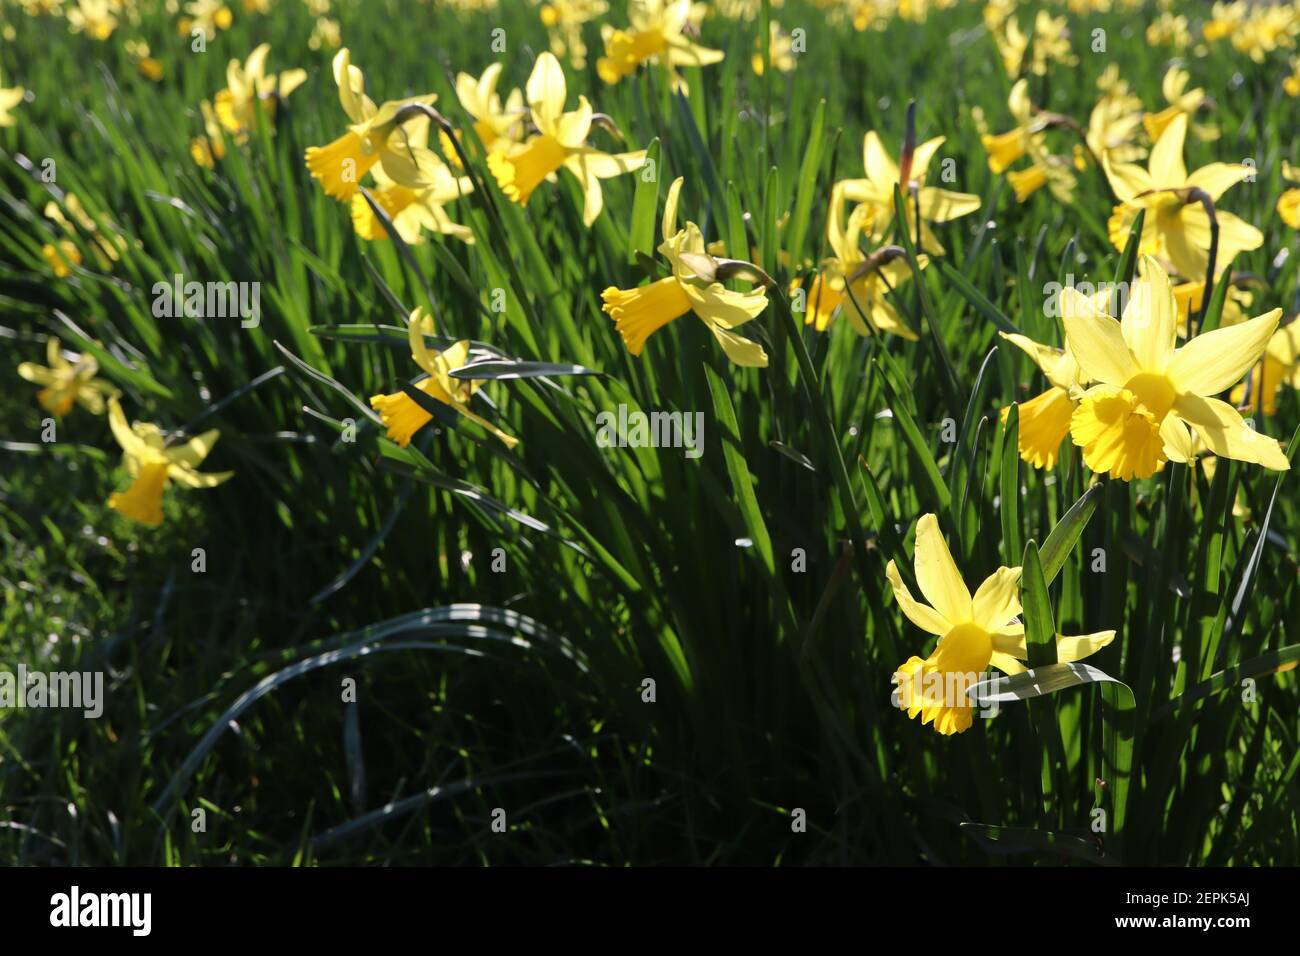 Narcissus ‘February Gold’ / Daffodil February Gold Division 6 Cyclamineus Daffodils yellow daffodils with frilly cups,  February, England, UK Stock Photo